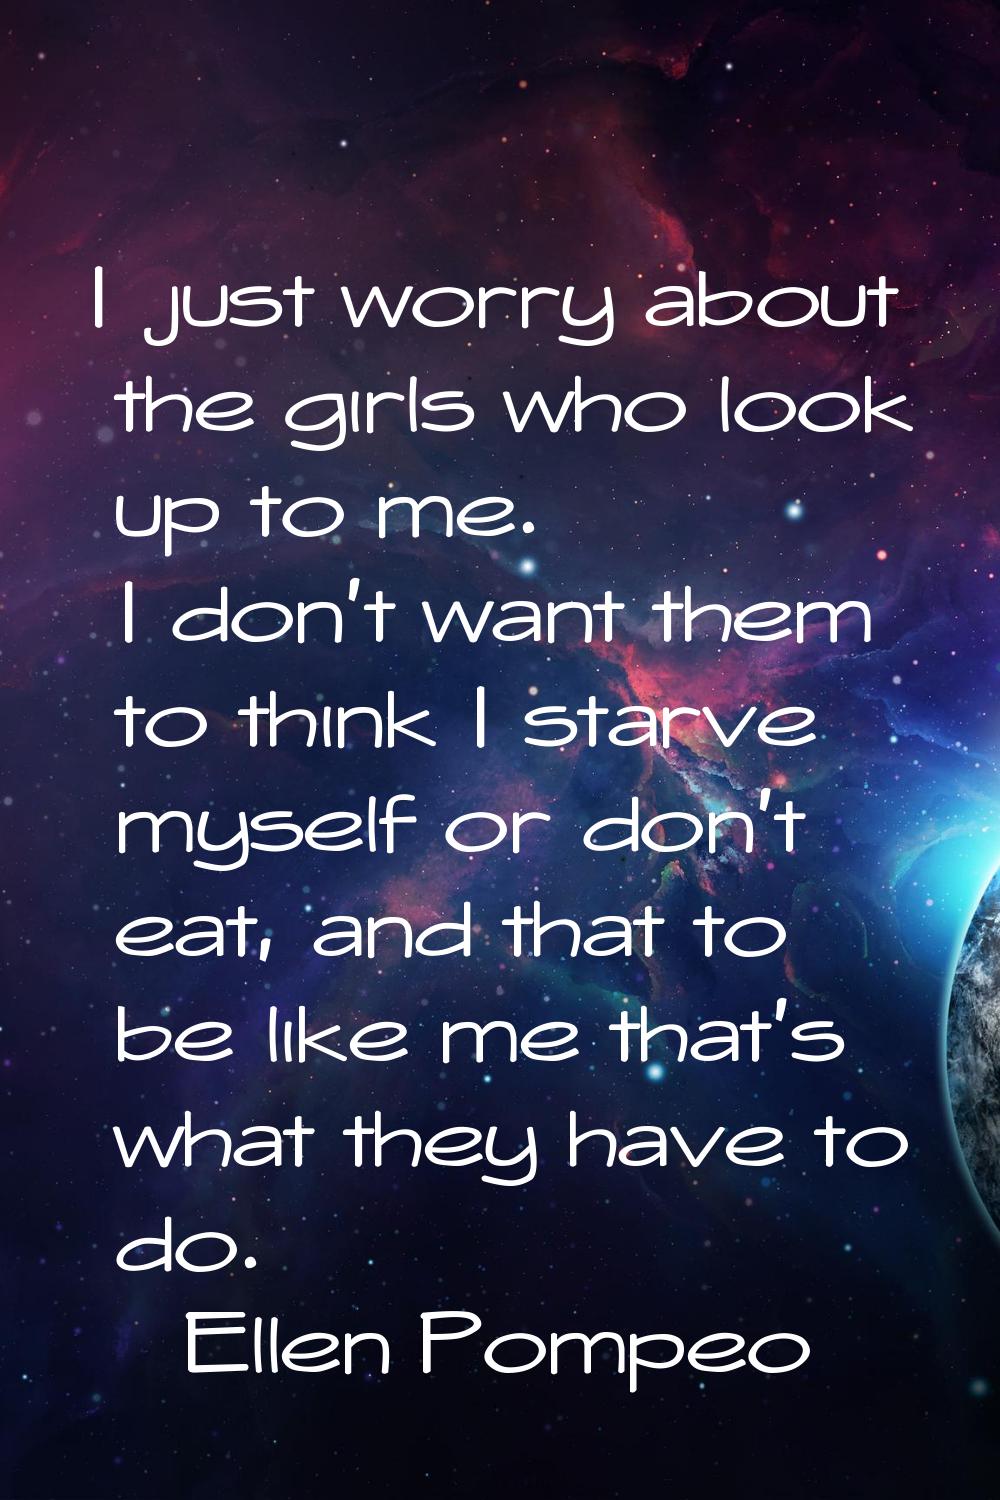 I just worry about the girls who look up to me. I don't want them to think I starve myself or don't